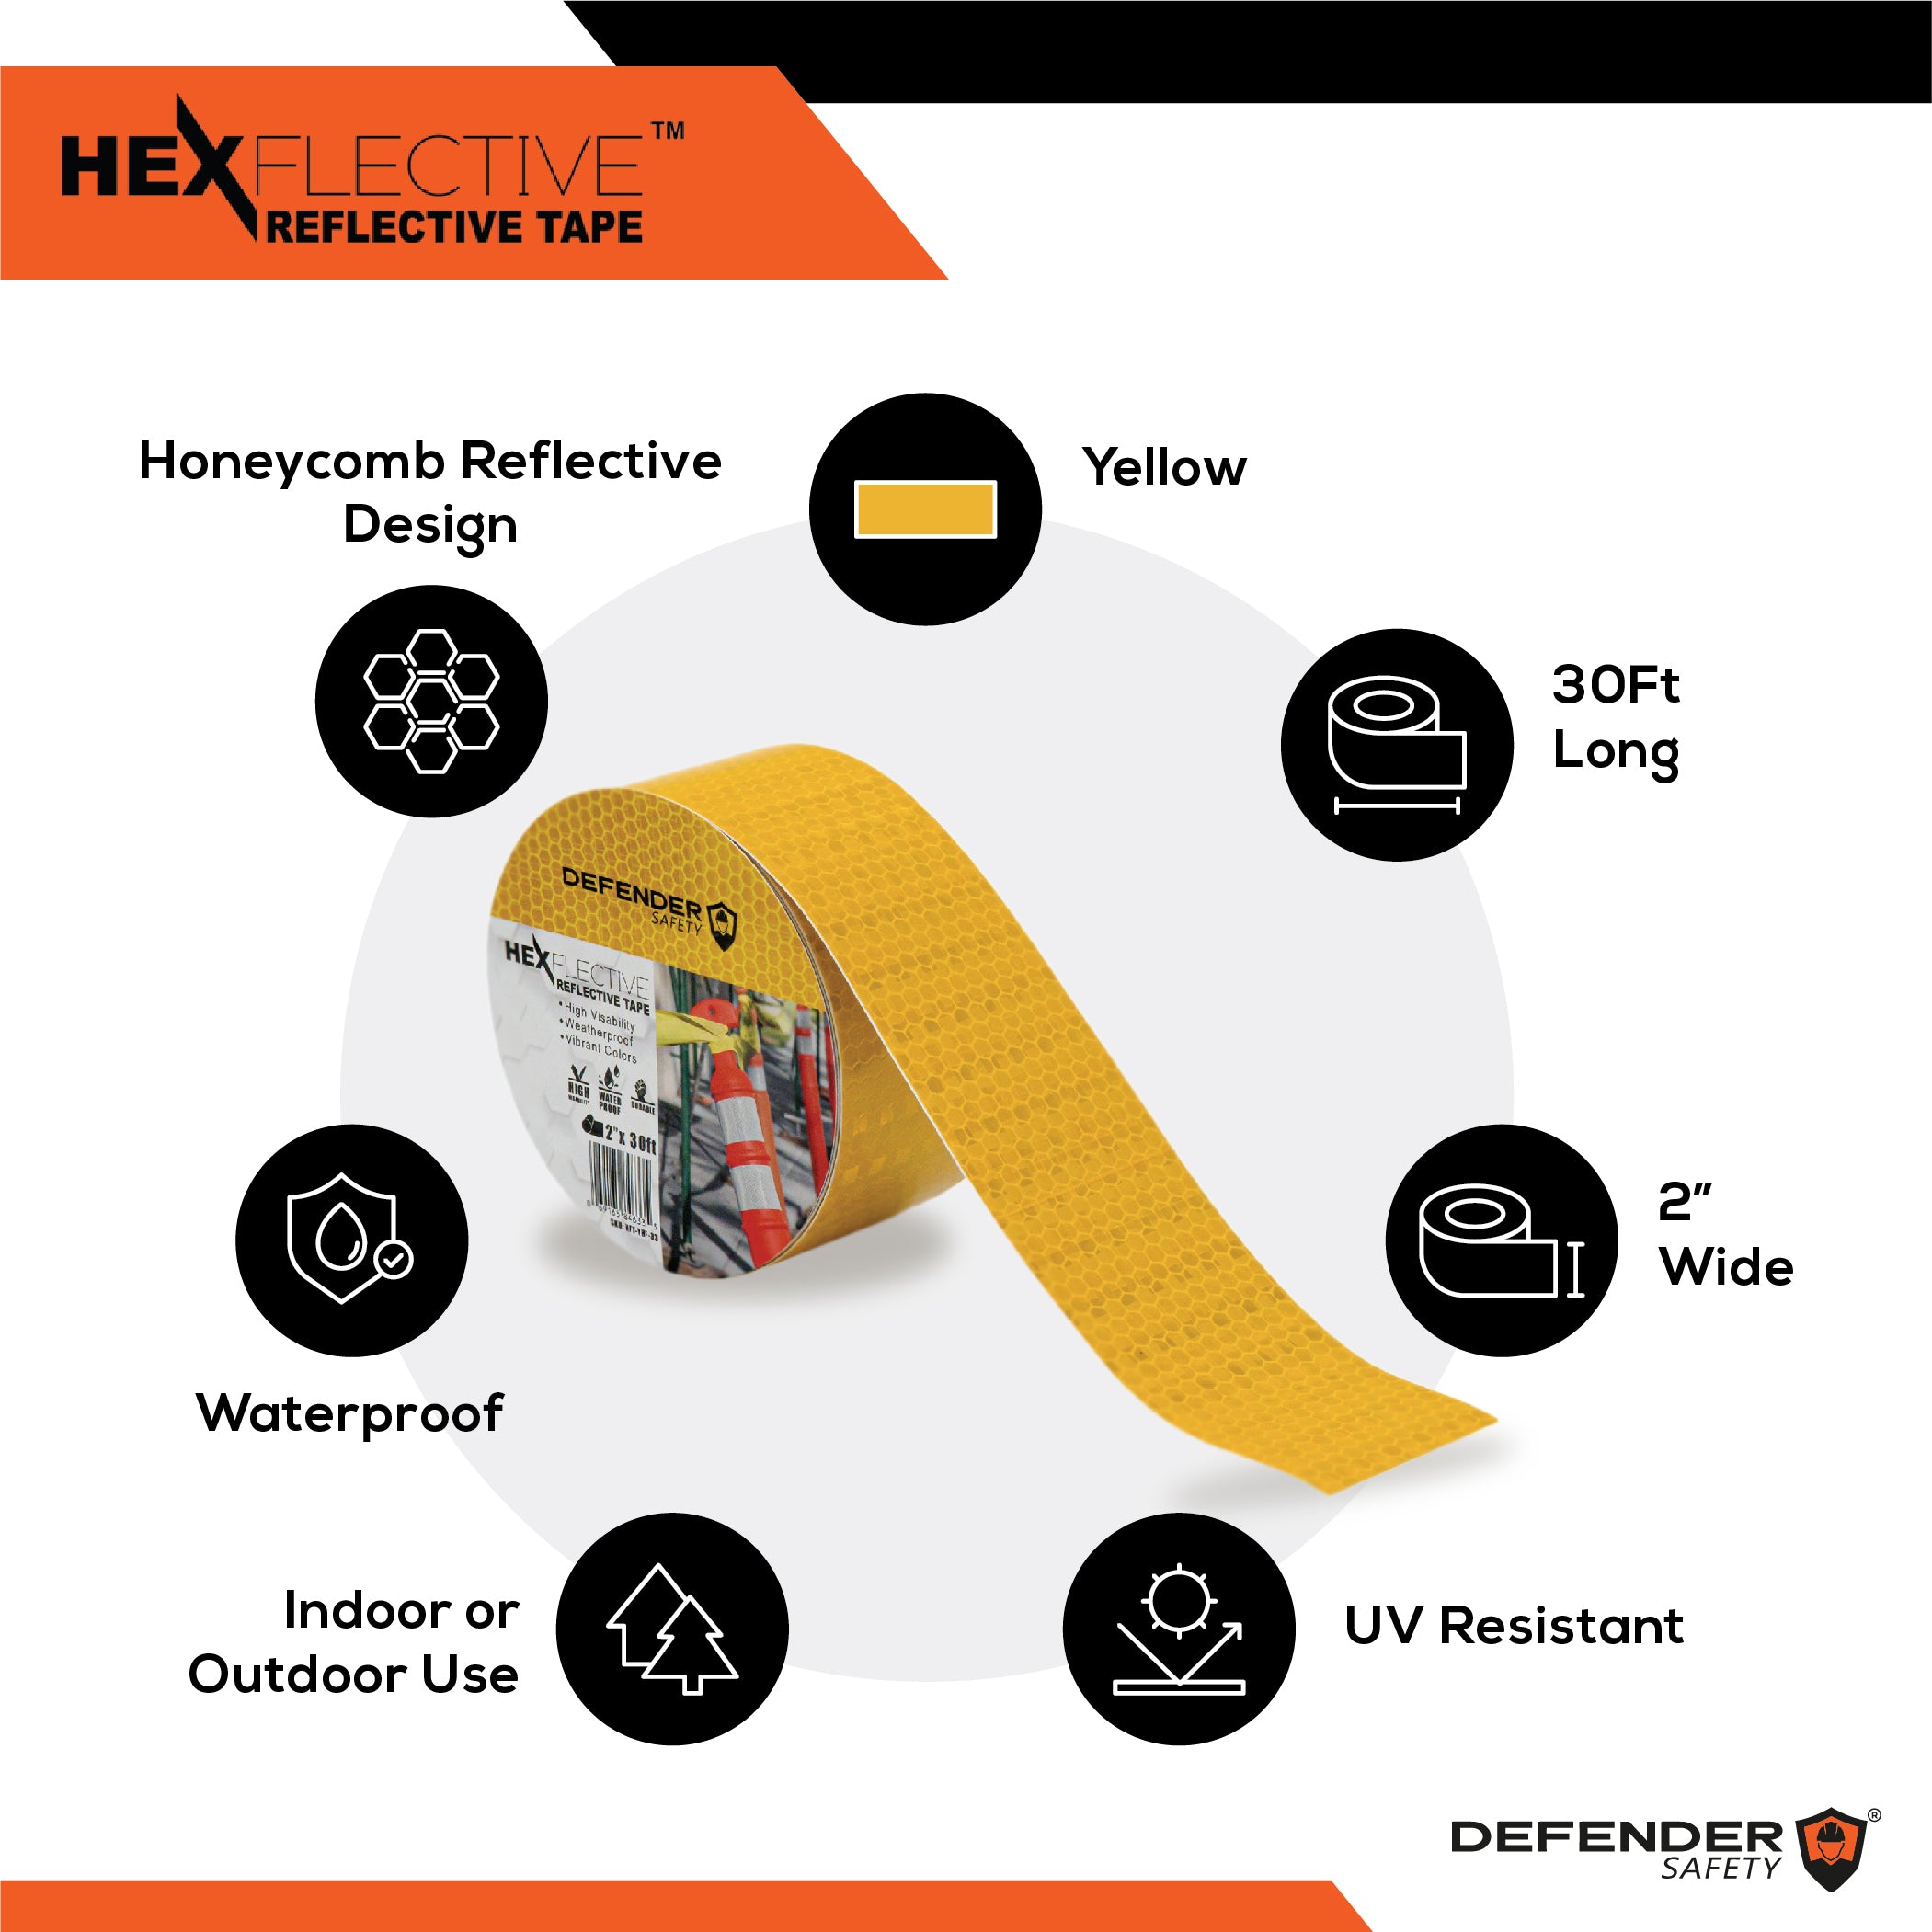 HEXFLECTIVE™ Reflective Tape. 2"x 30'. Yellow Honeycomb Pattern - Defender Safety